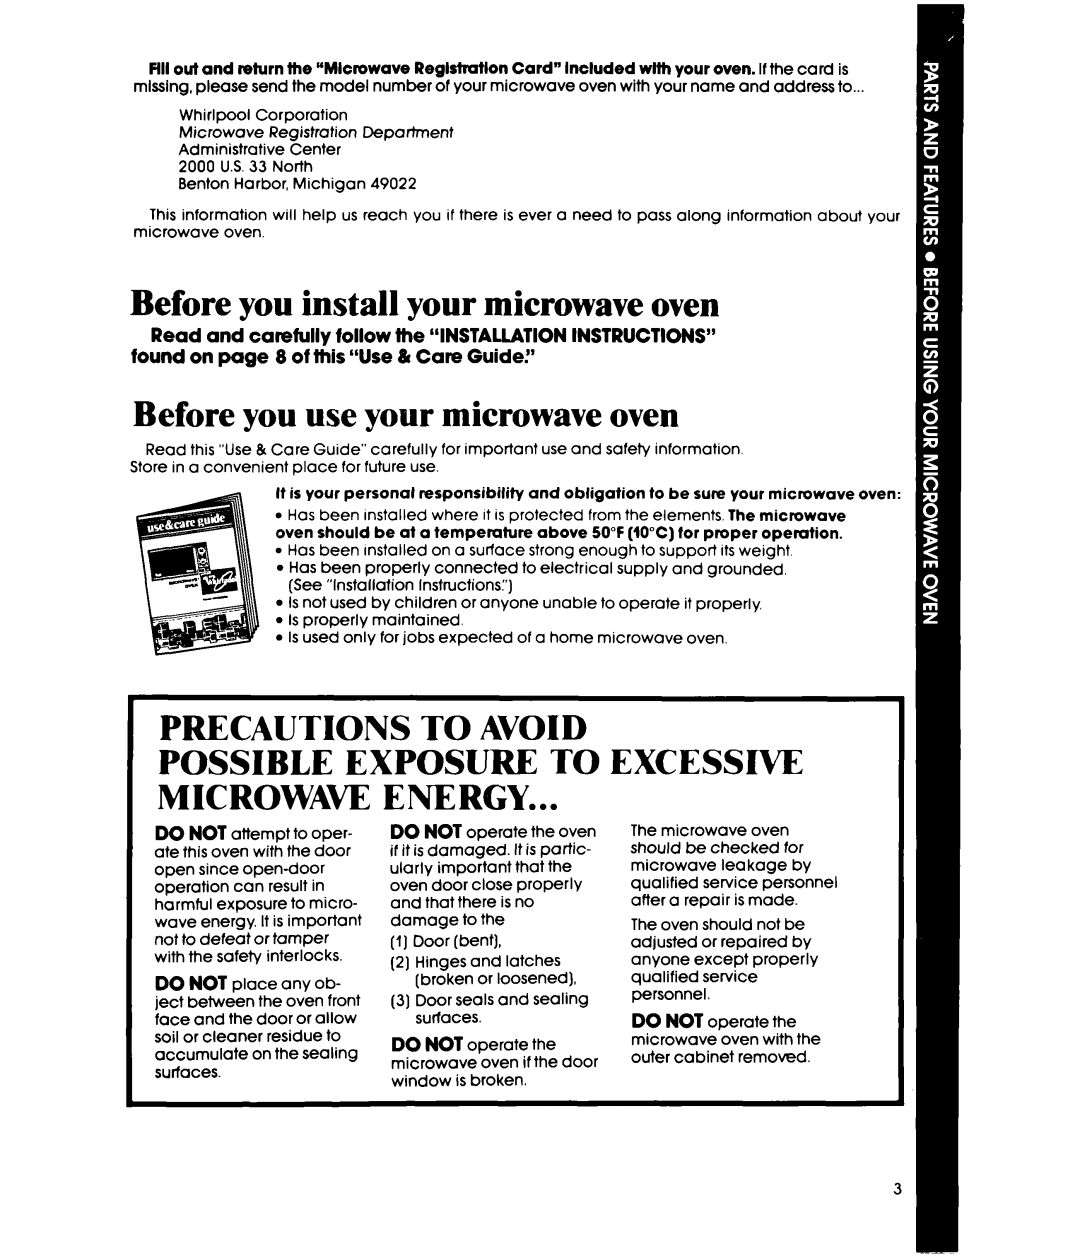 Whirlpool MW32OOXS manual Before you install your microwave oven, Before you use your microwave oven, Precautions To Avoid 